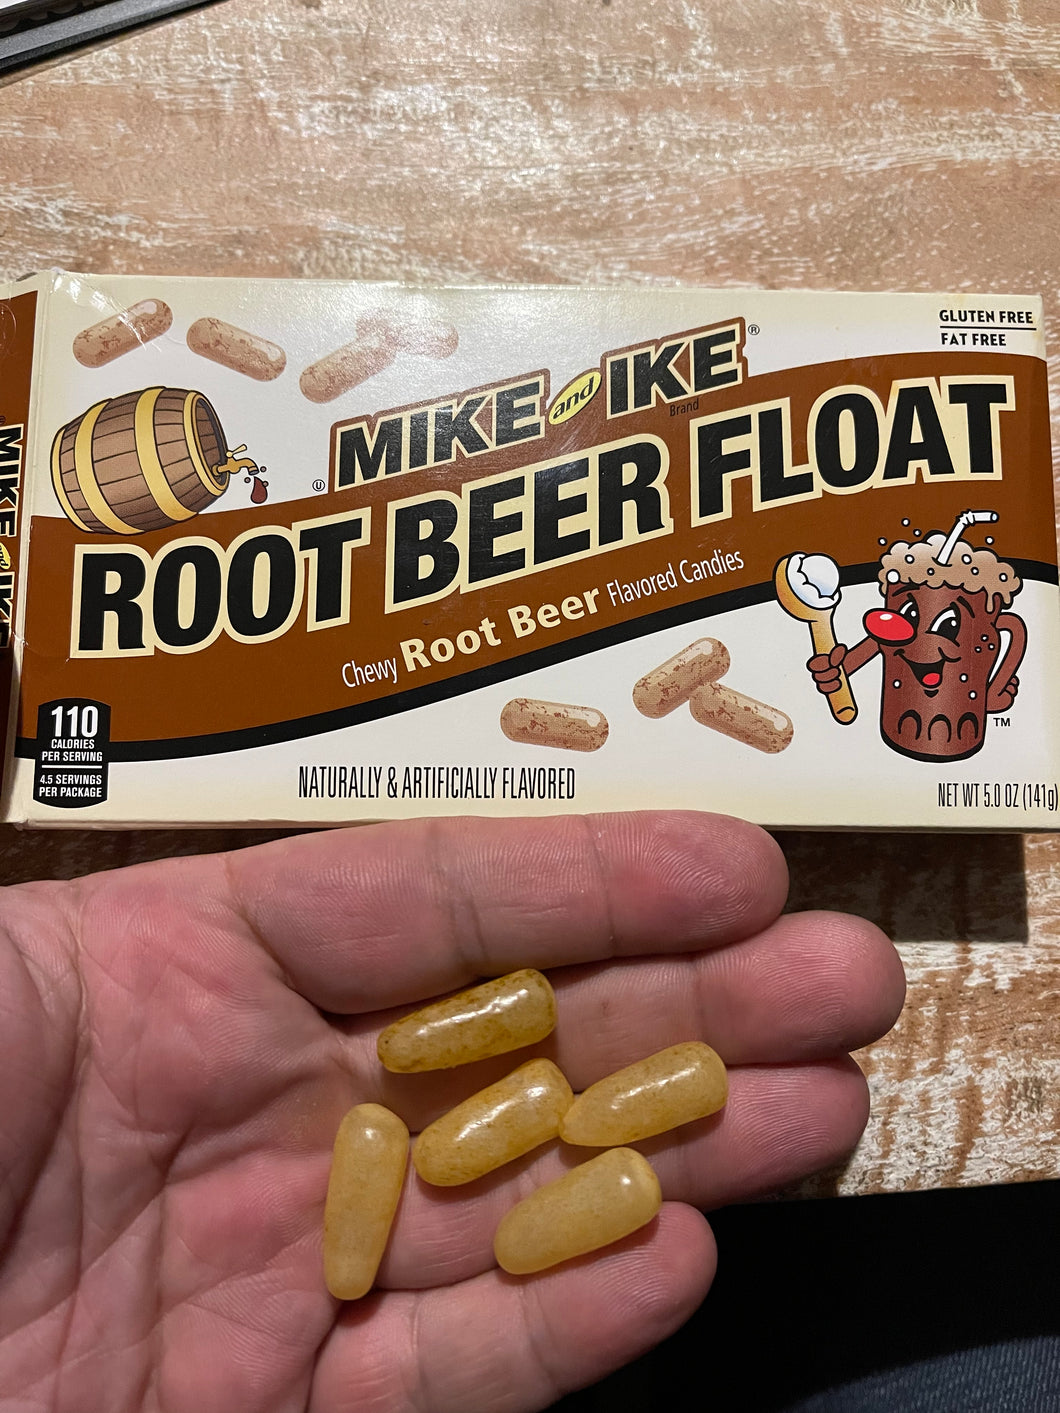 Mike and Ike Root Beer Float